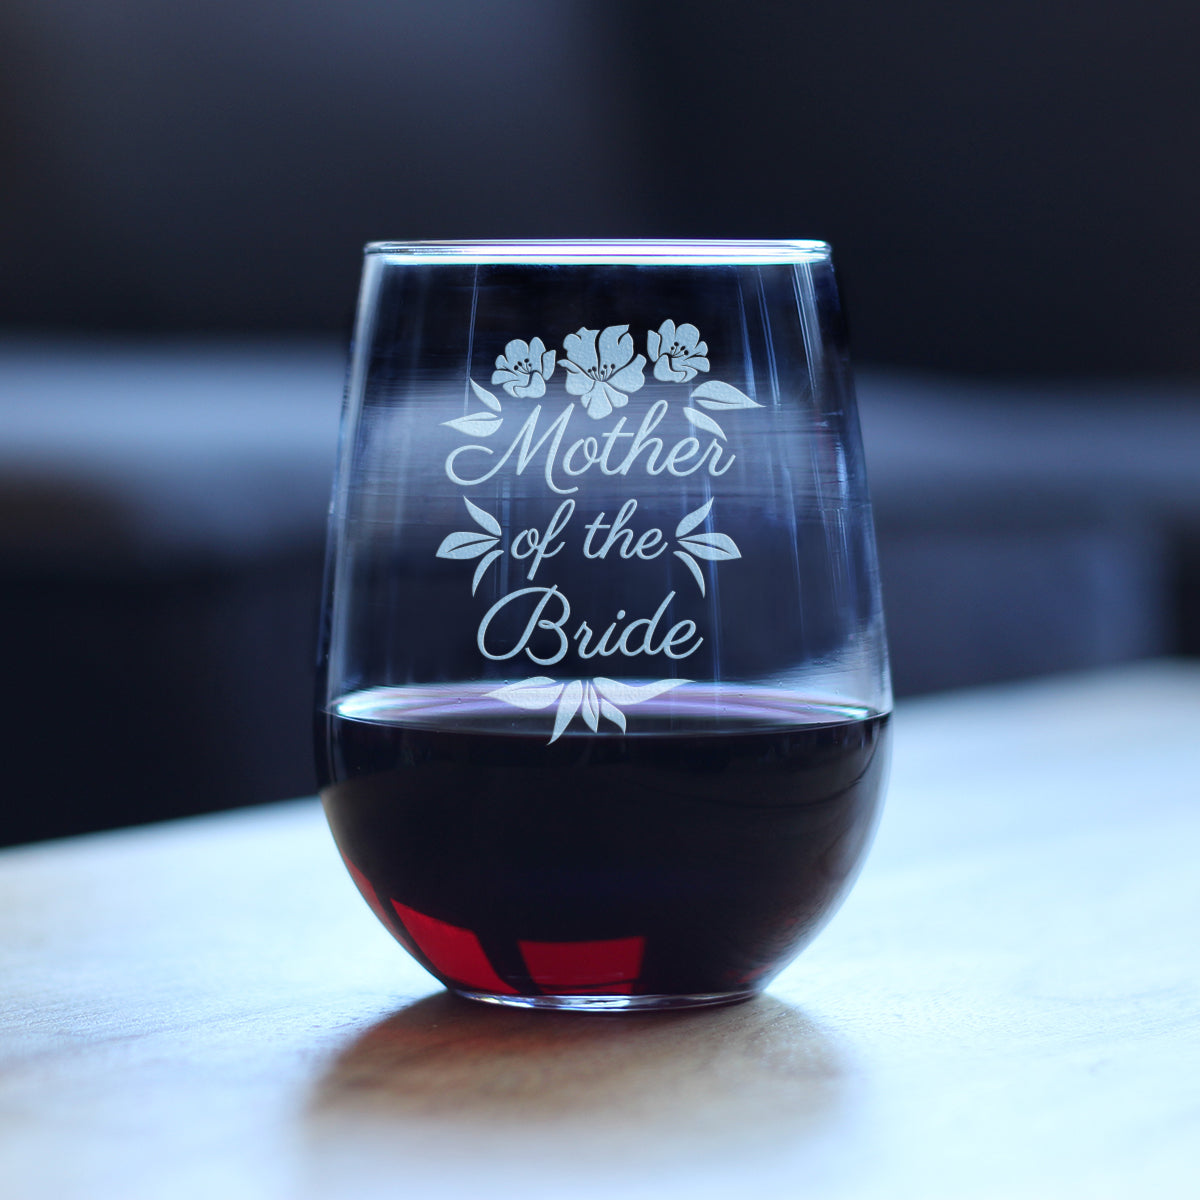 Mother of the Bride Stemless Wine Glass - Unique Wedding Gift for Soon to be Mother-in-Law - Cute Engraved Wedding Cup Gift